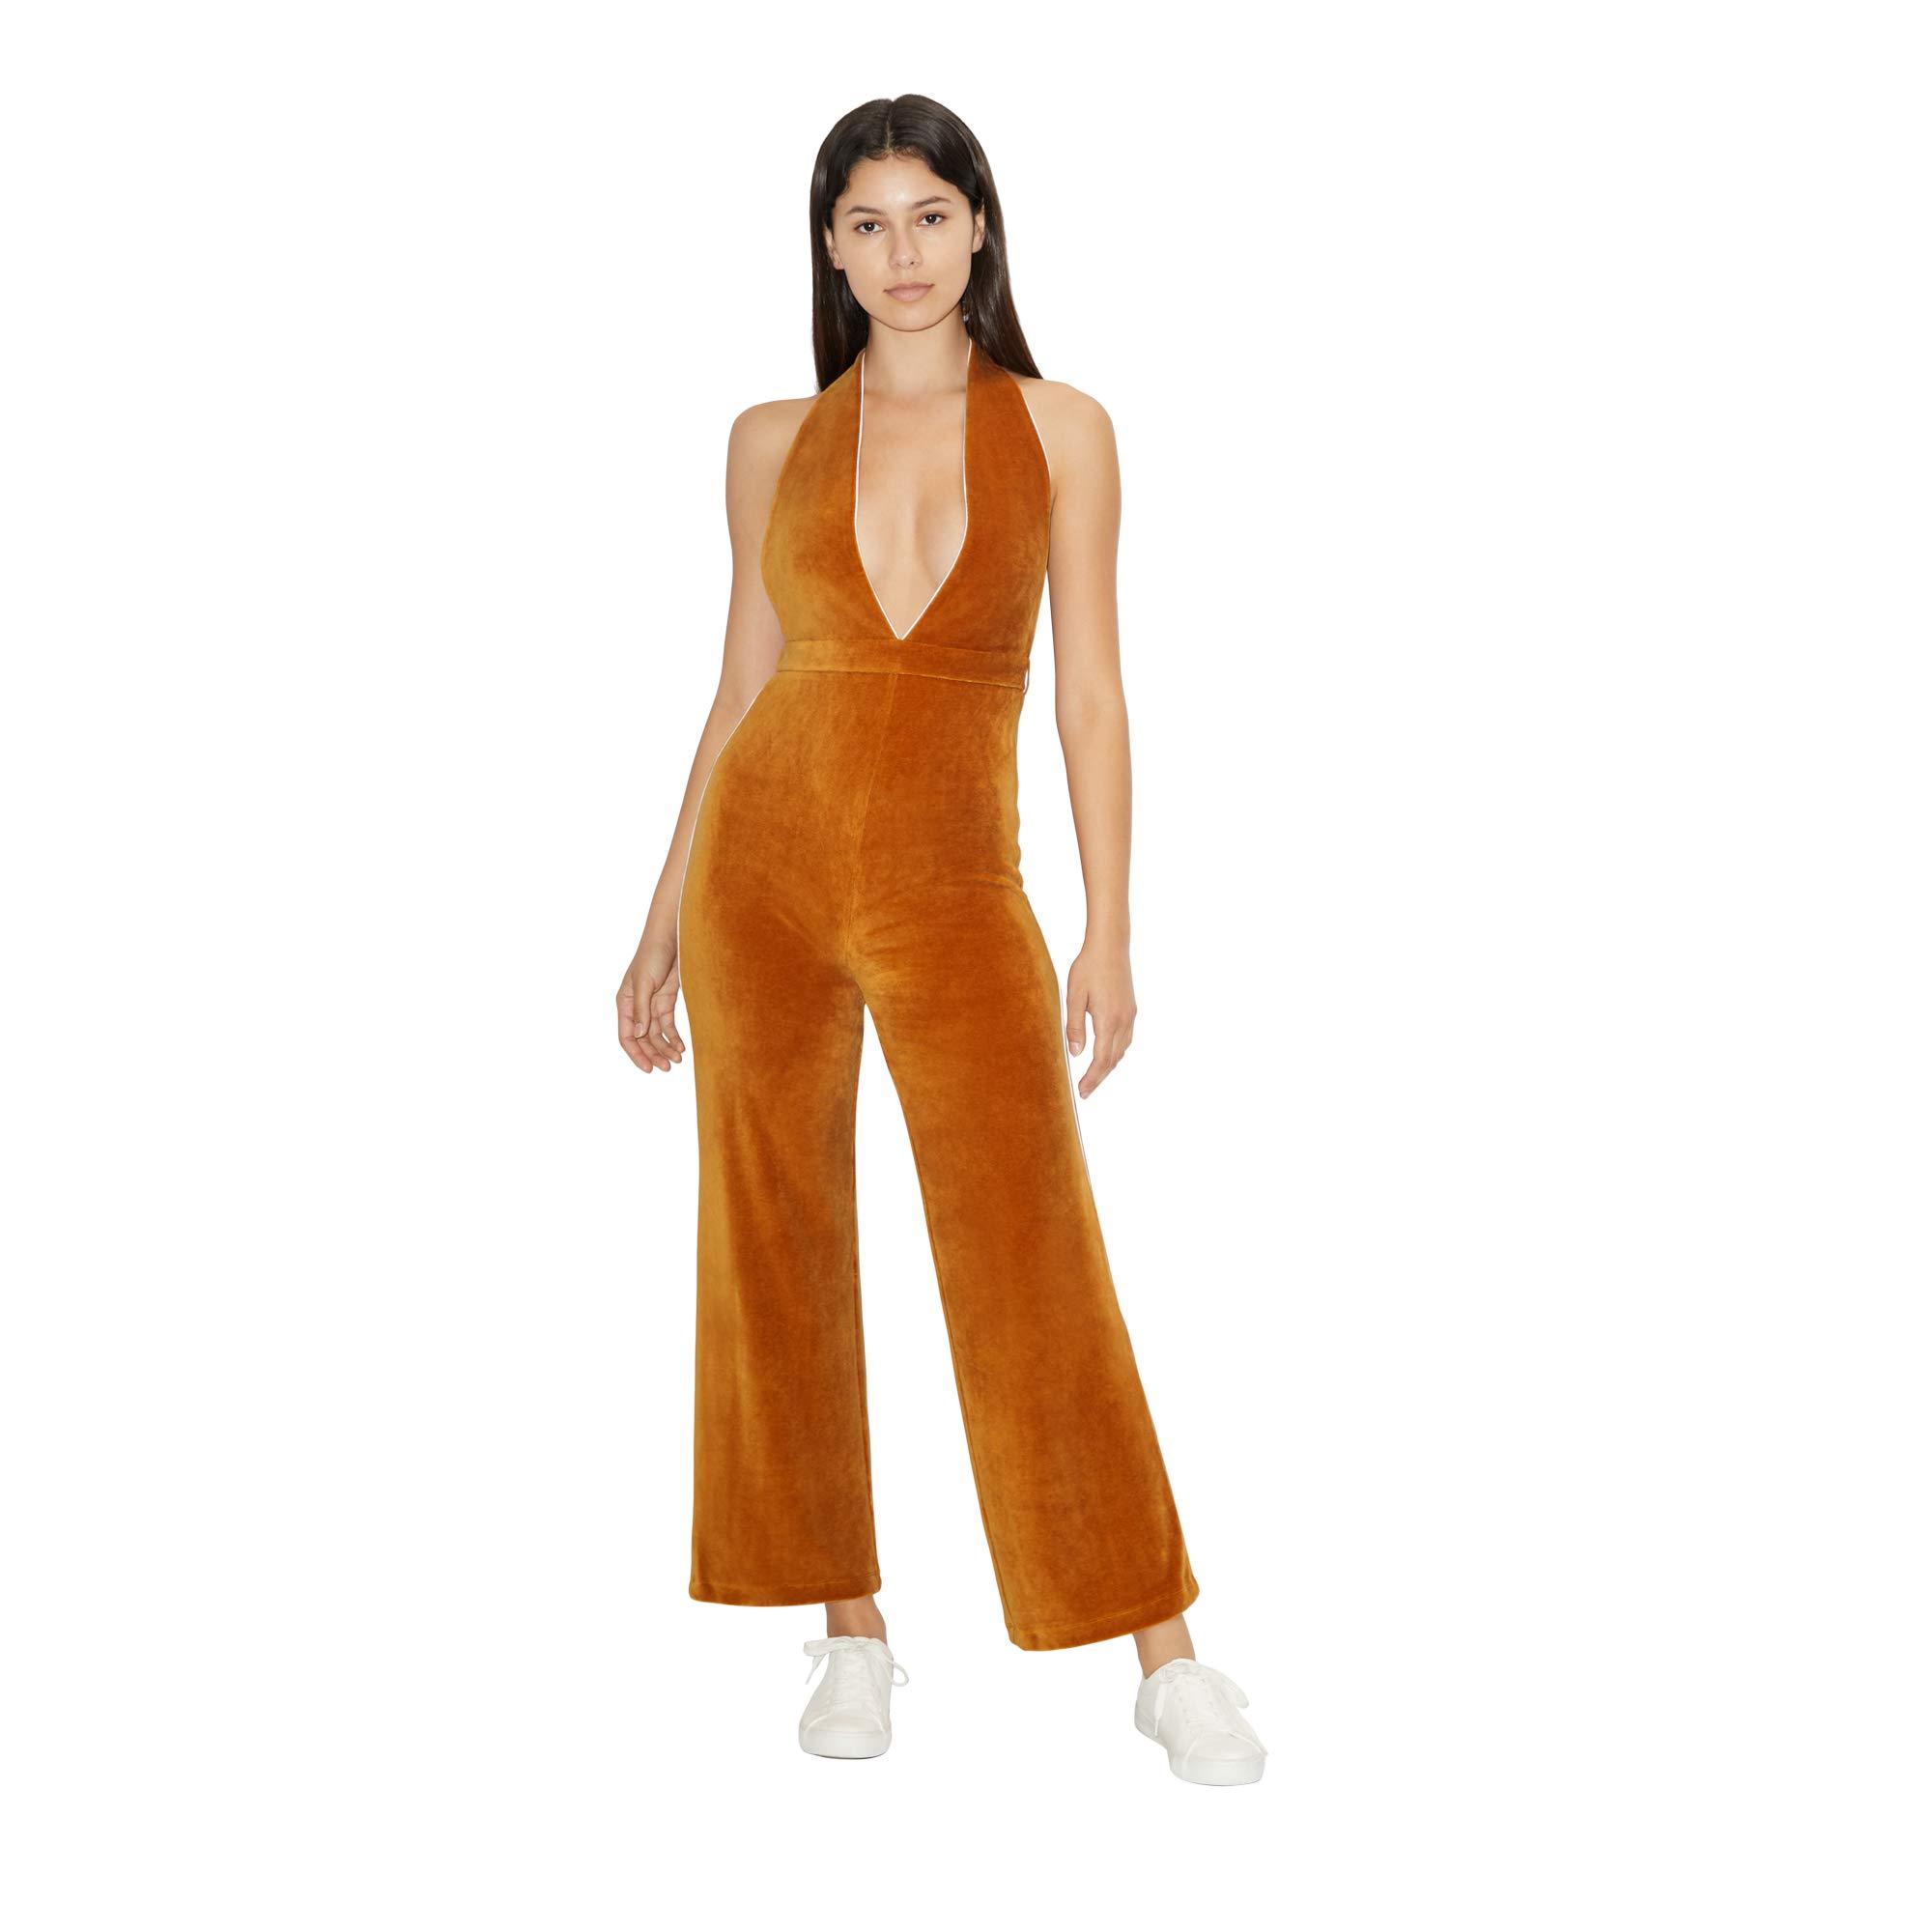 Contractie Onderstrepen complexiteit American Apparel Stretch Velour Sleeveless Deep V Jumpsuit | Lyst